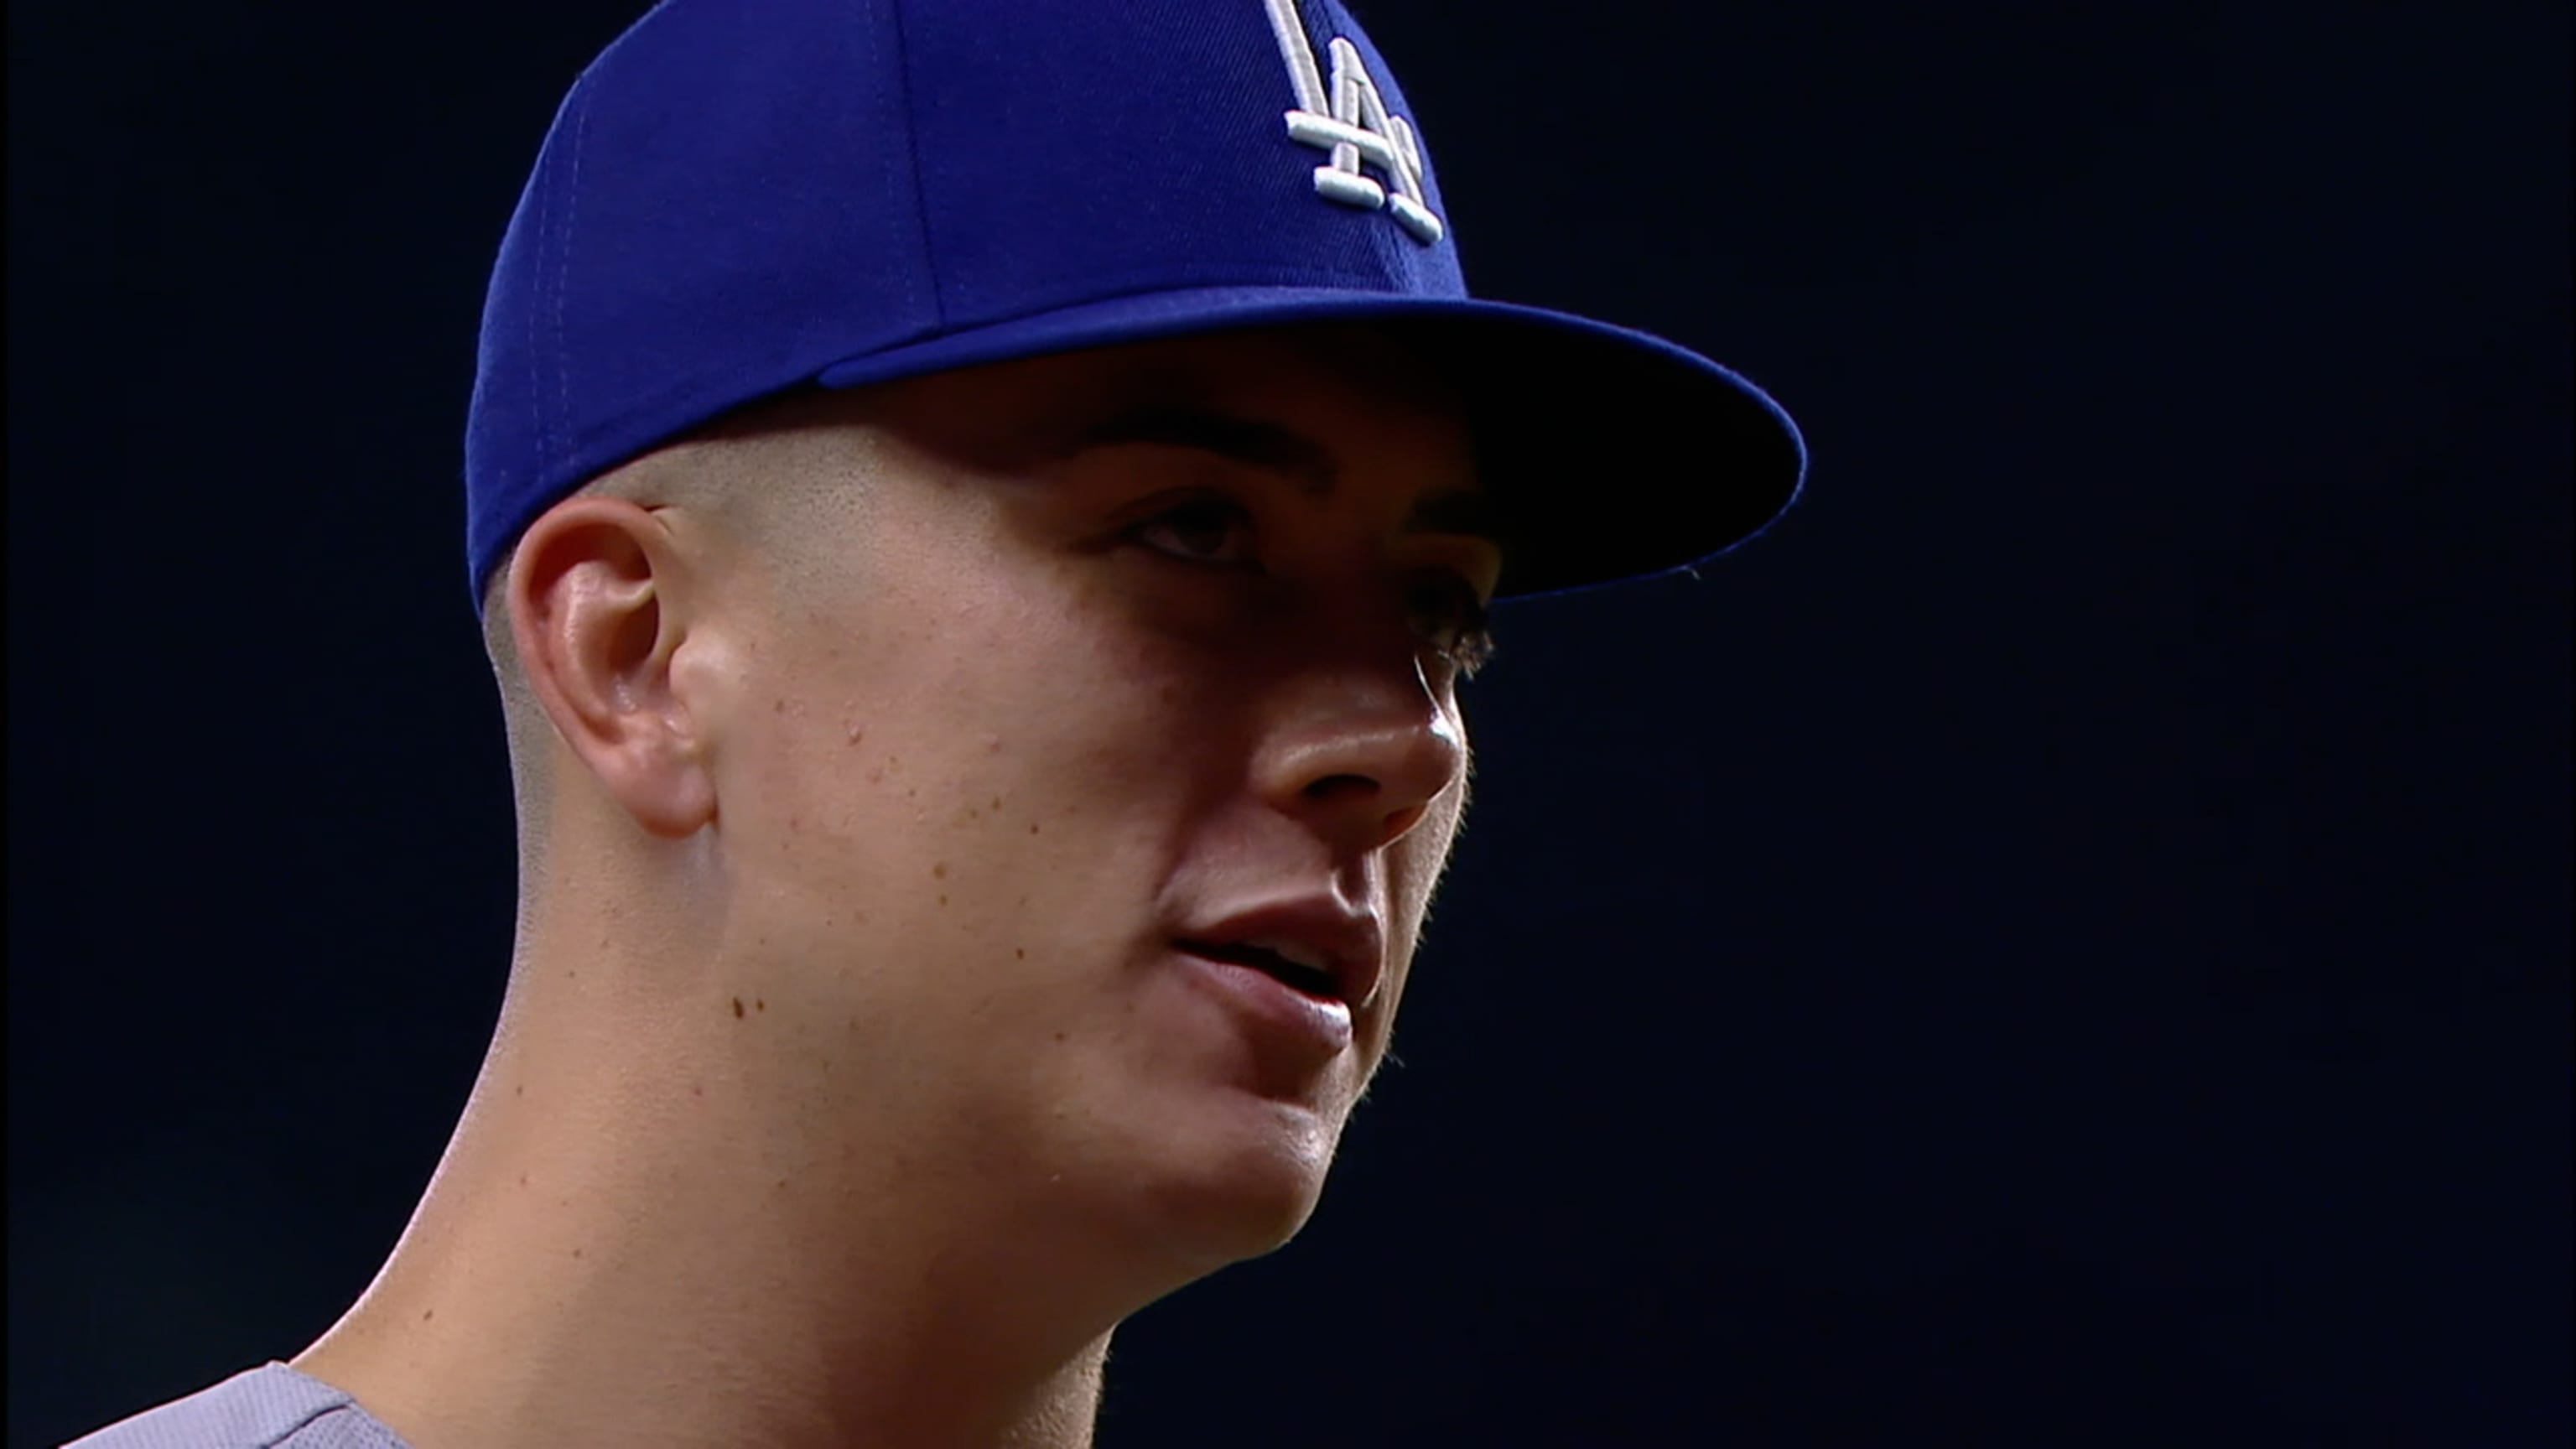 Hard-throwing Bobby Miller solid in MLB debut, leads Dodgers past Strider,  Braves 8-1